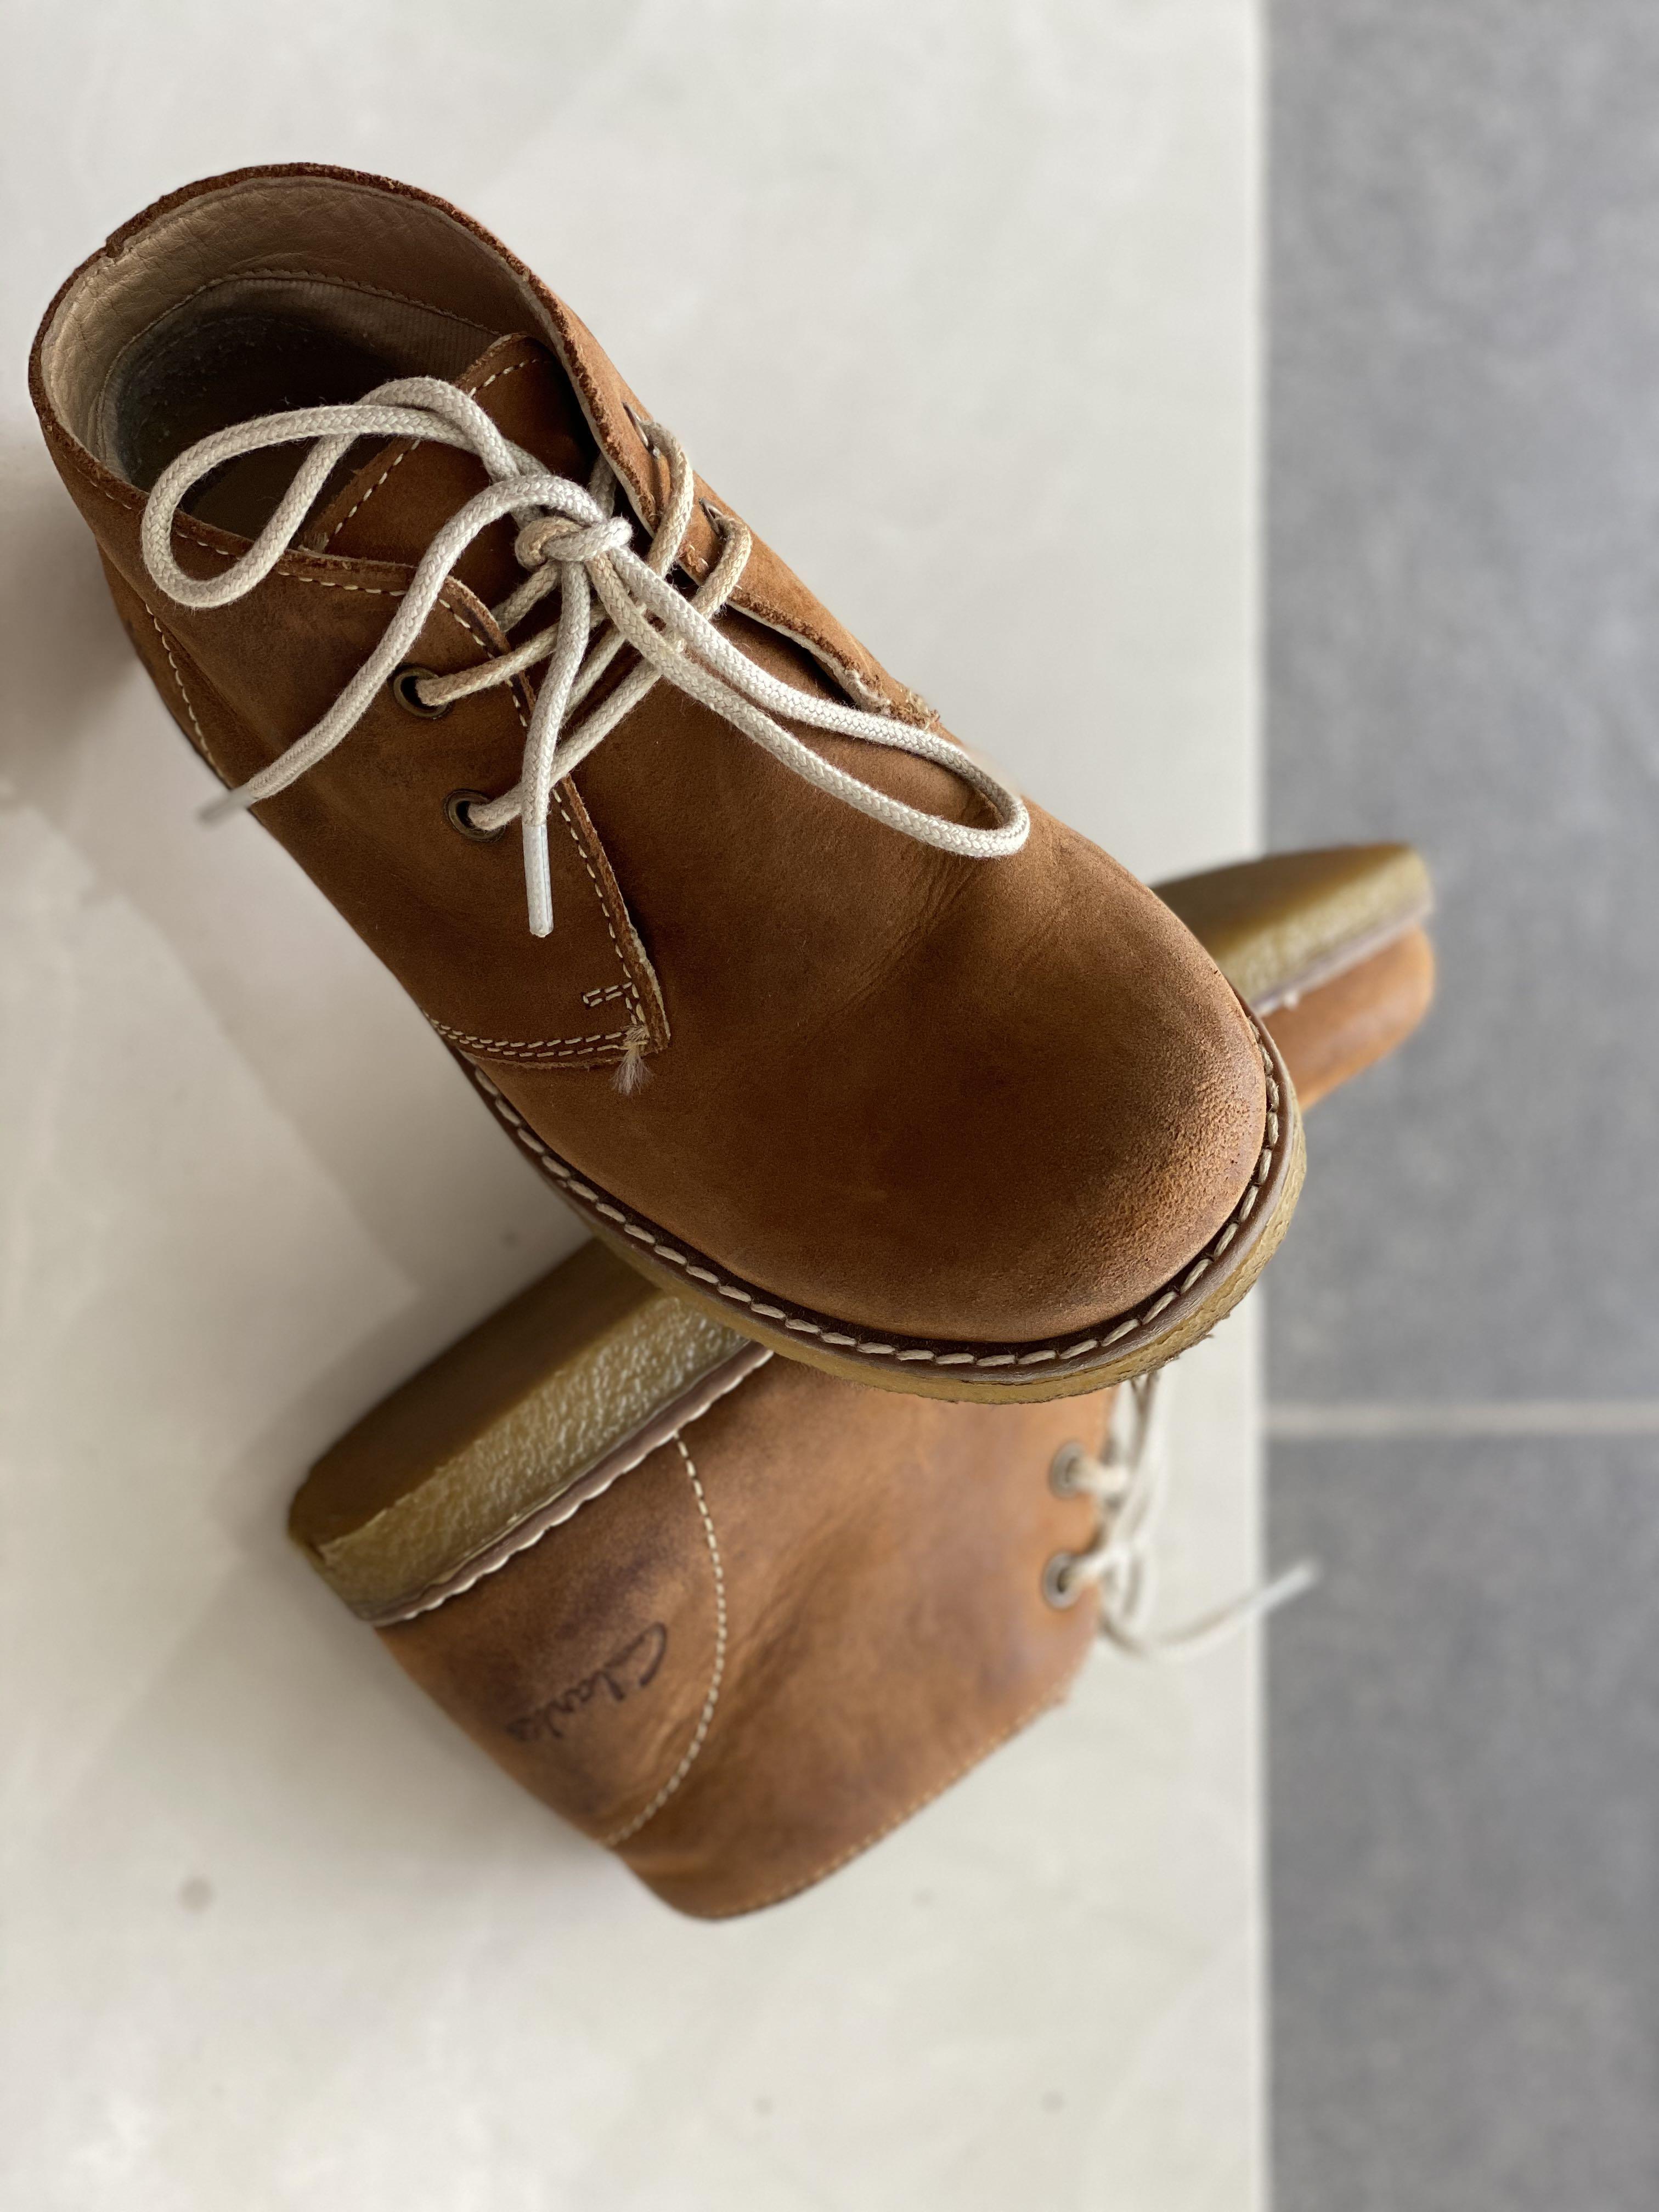 Boots Boys Clarks Leather, Babies 